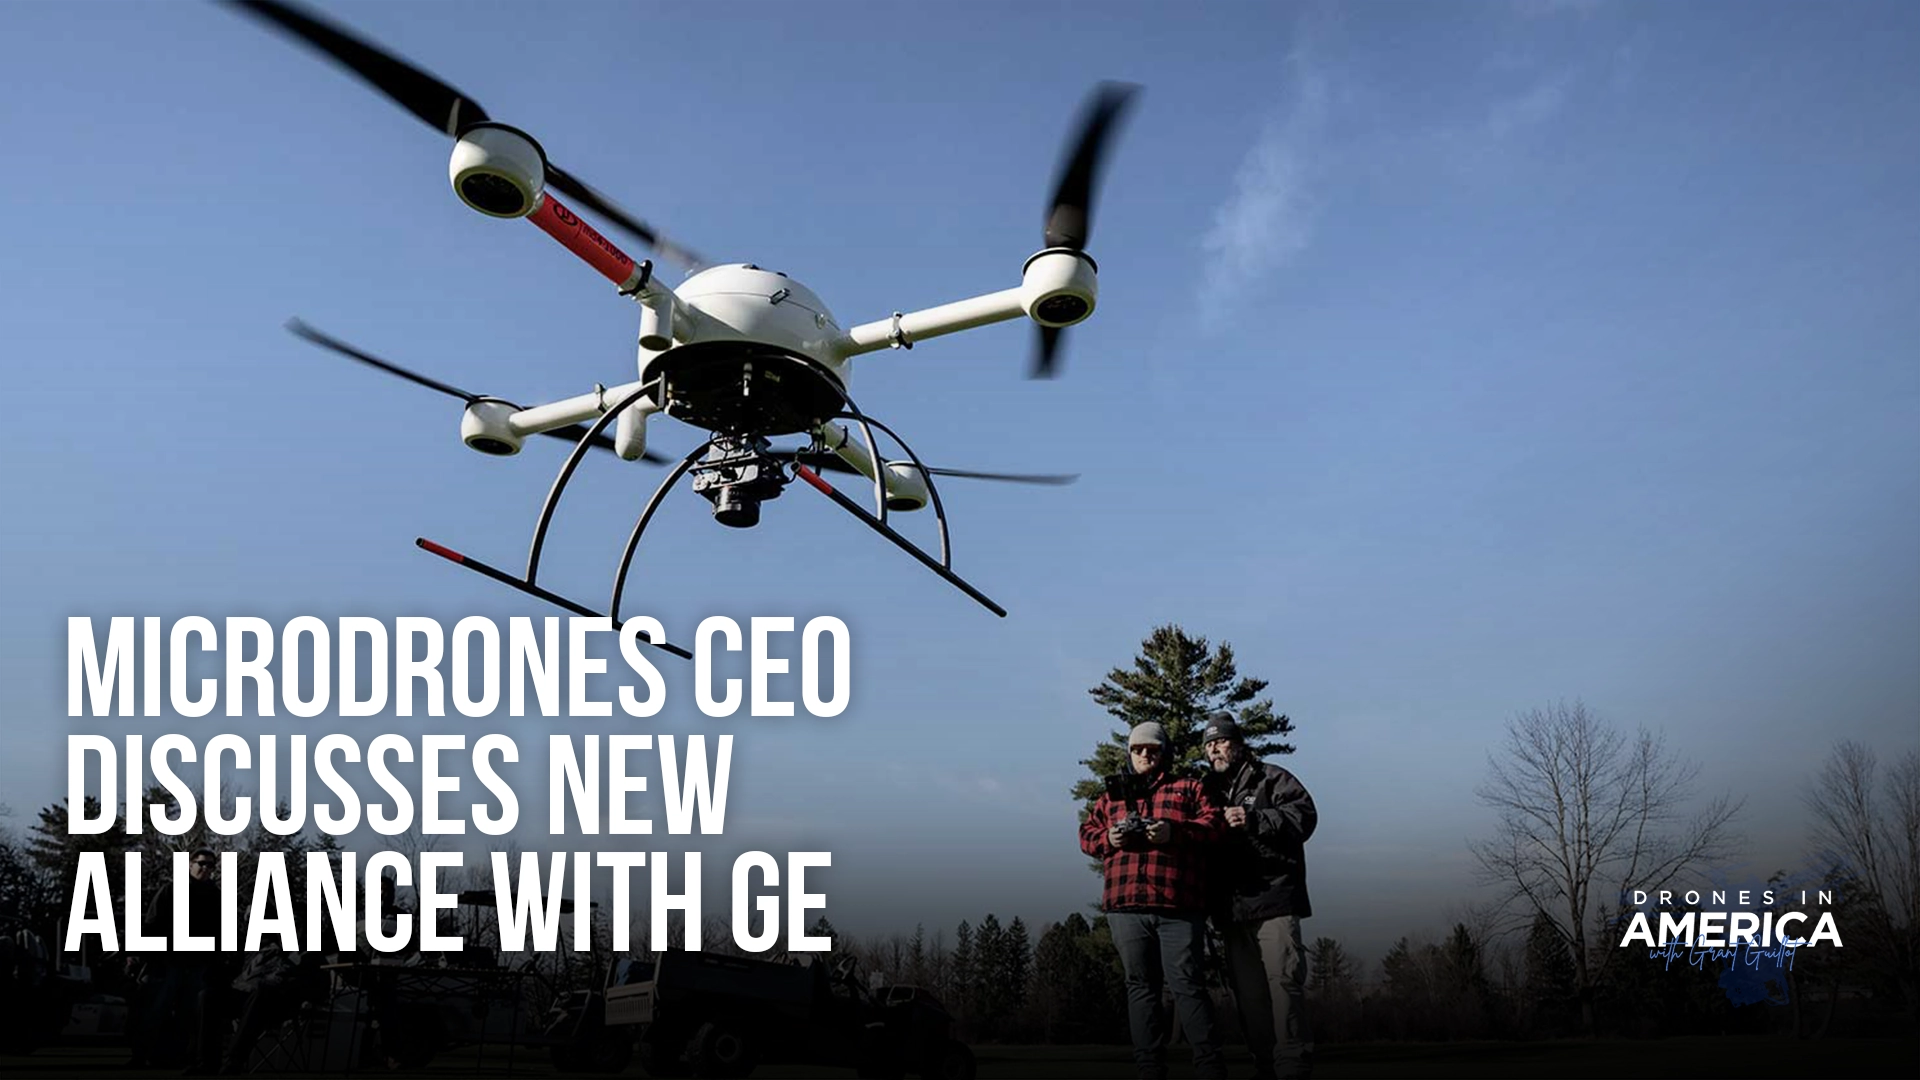 Microdrones CEO Discusses New Alliance with GE